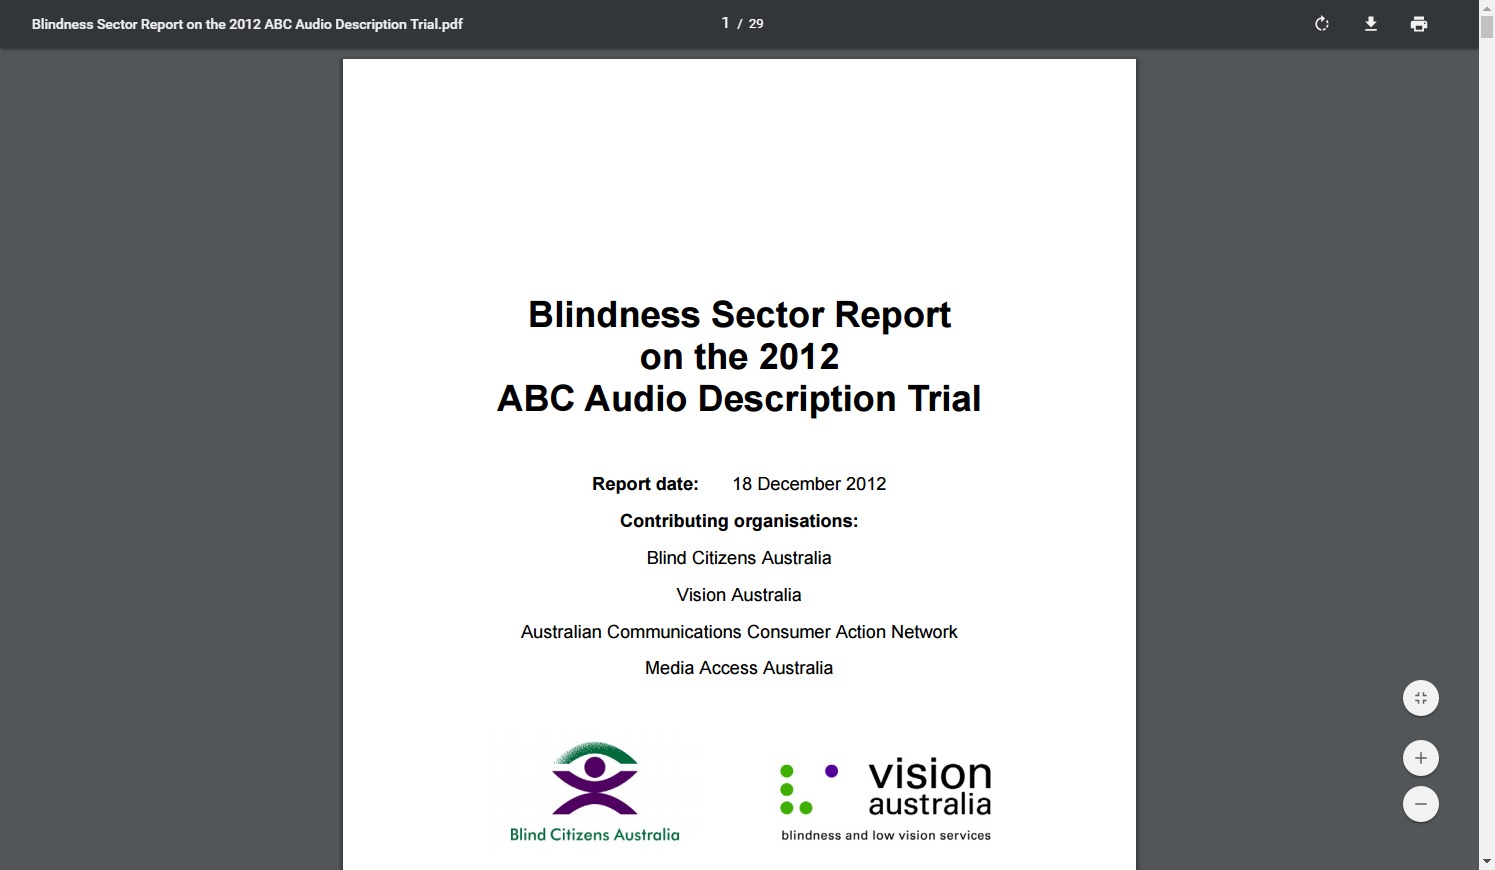 Image from: Blindness Sector Report on the 2012 ABC Audio Description Trial